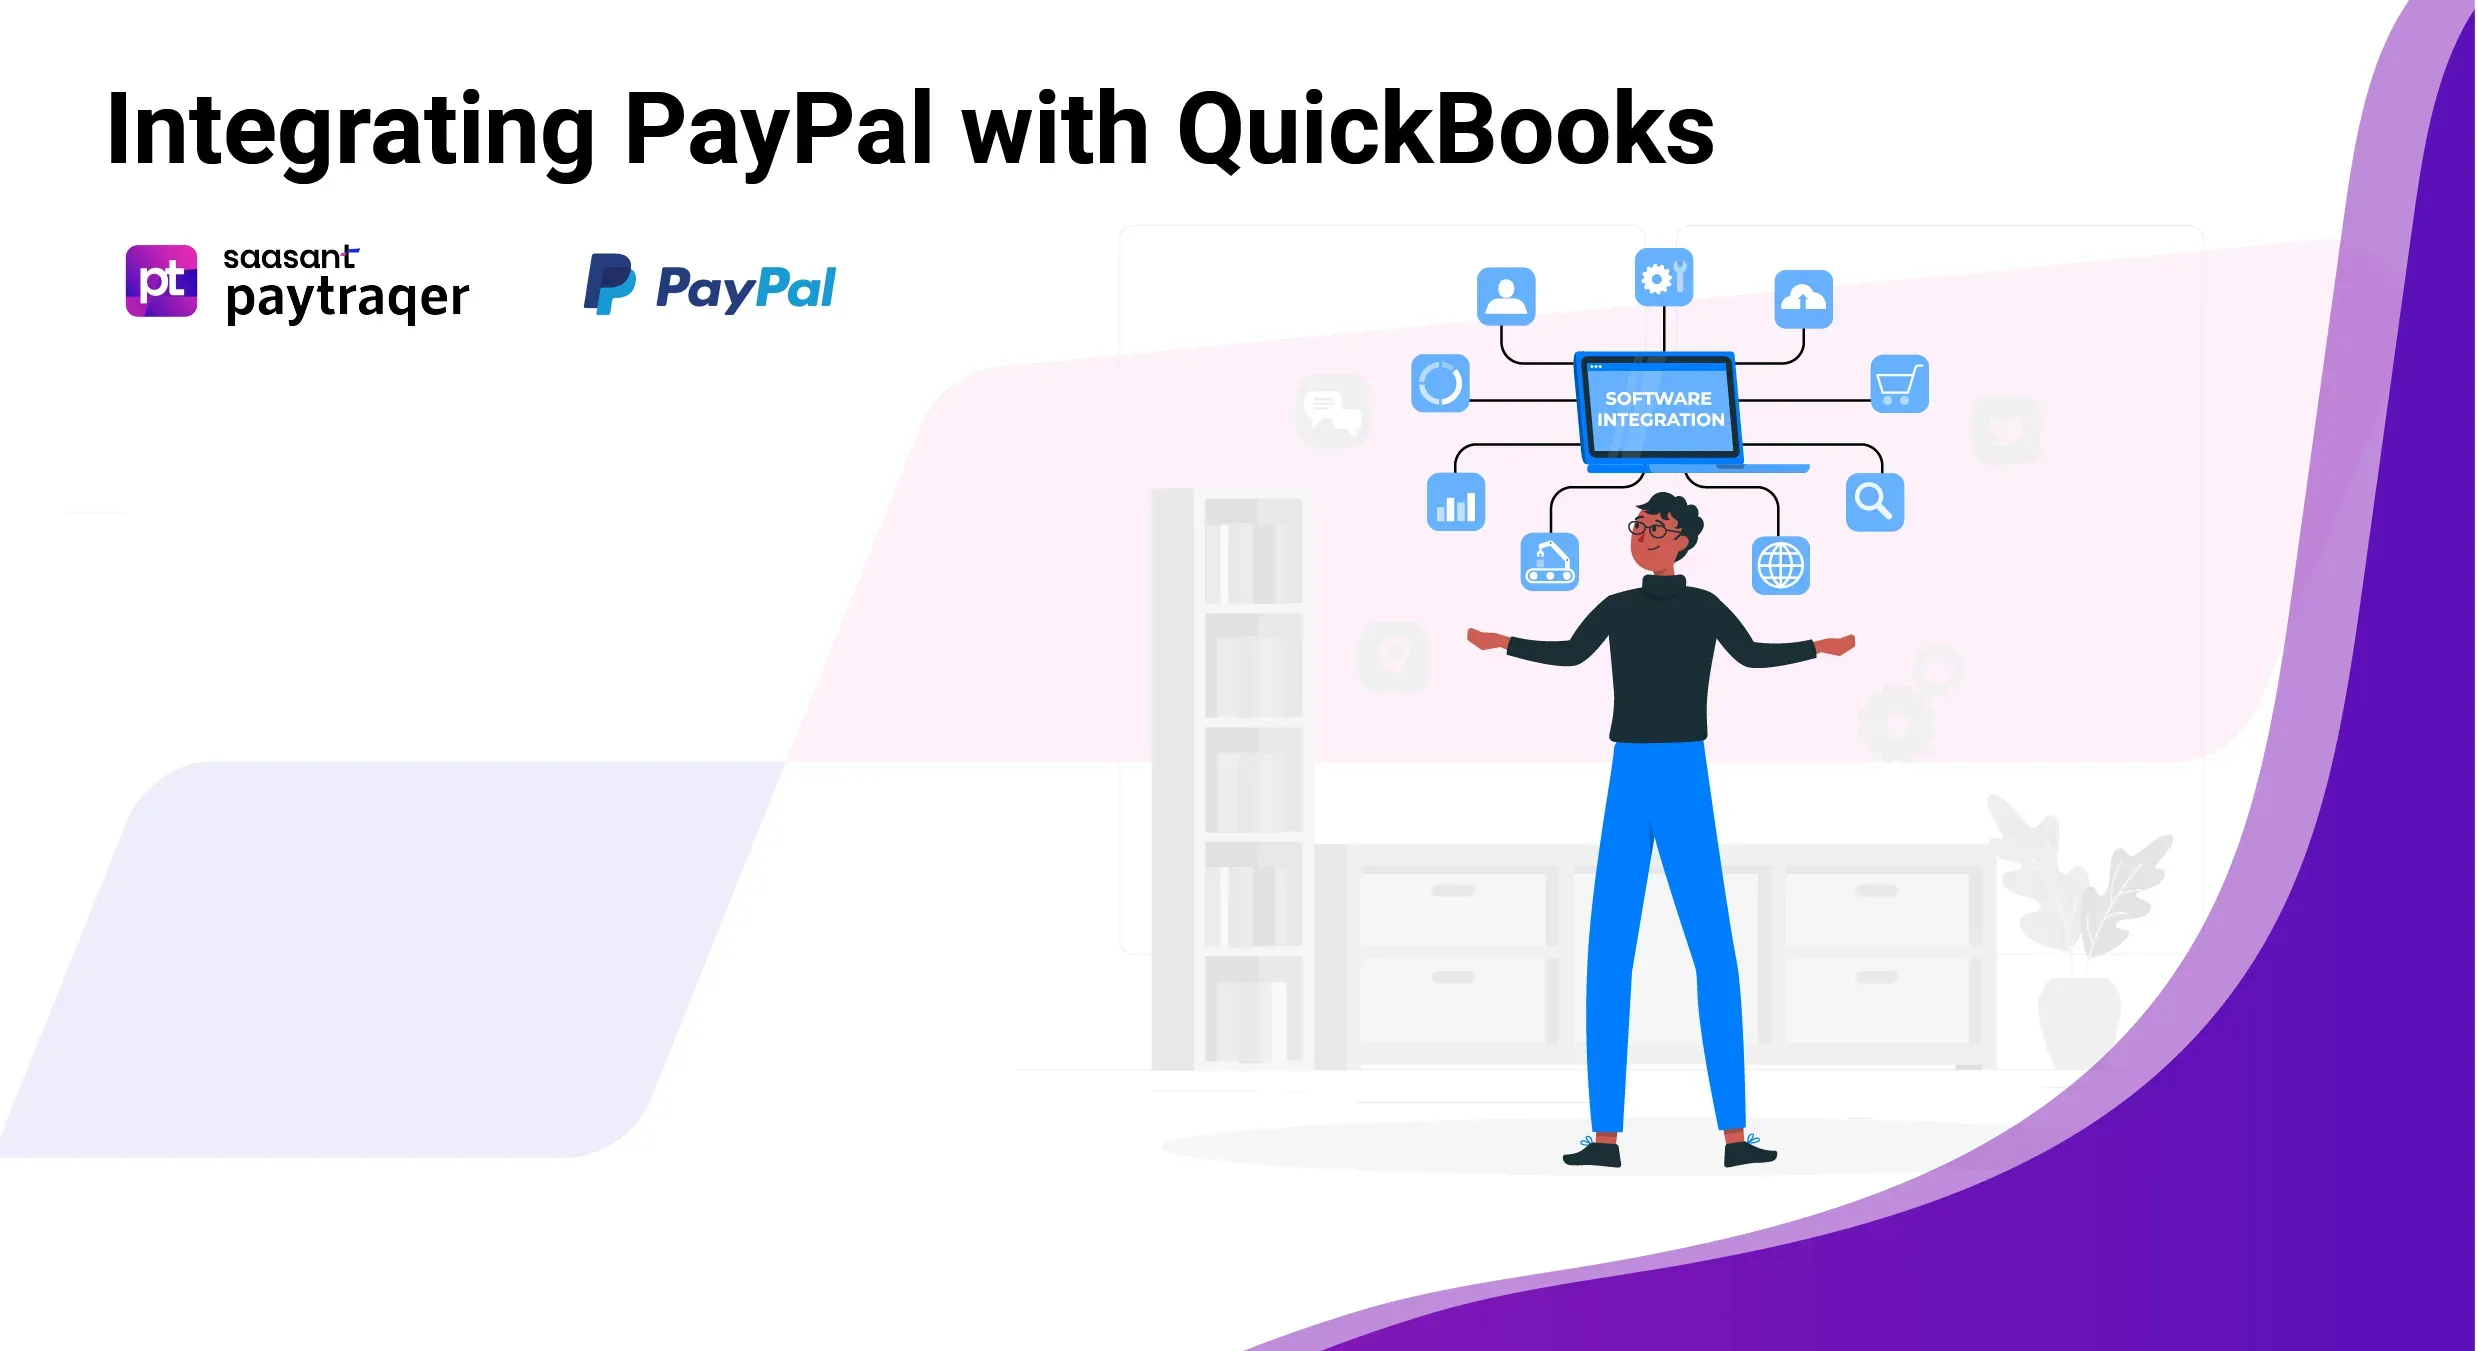 Integrating PayPal with QuickBooks